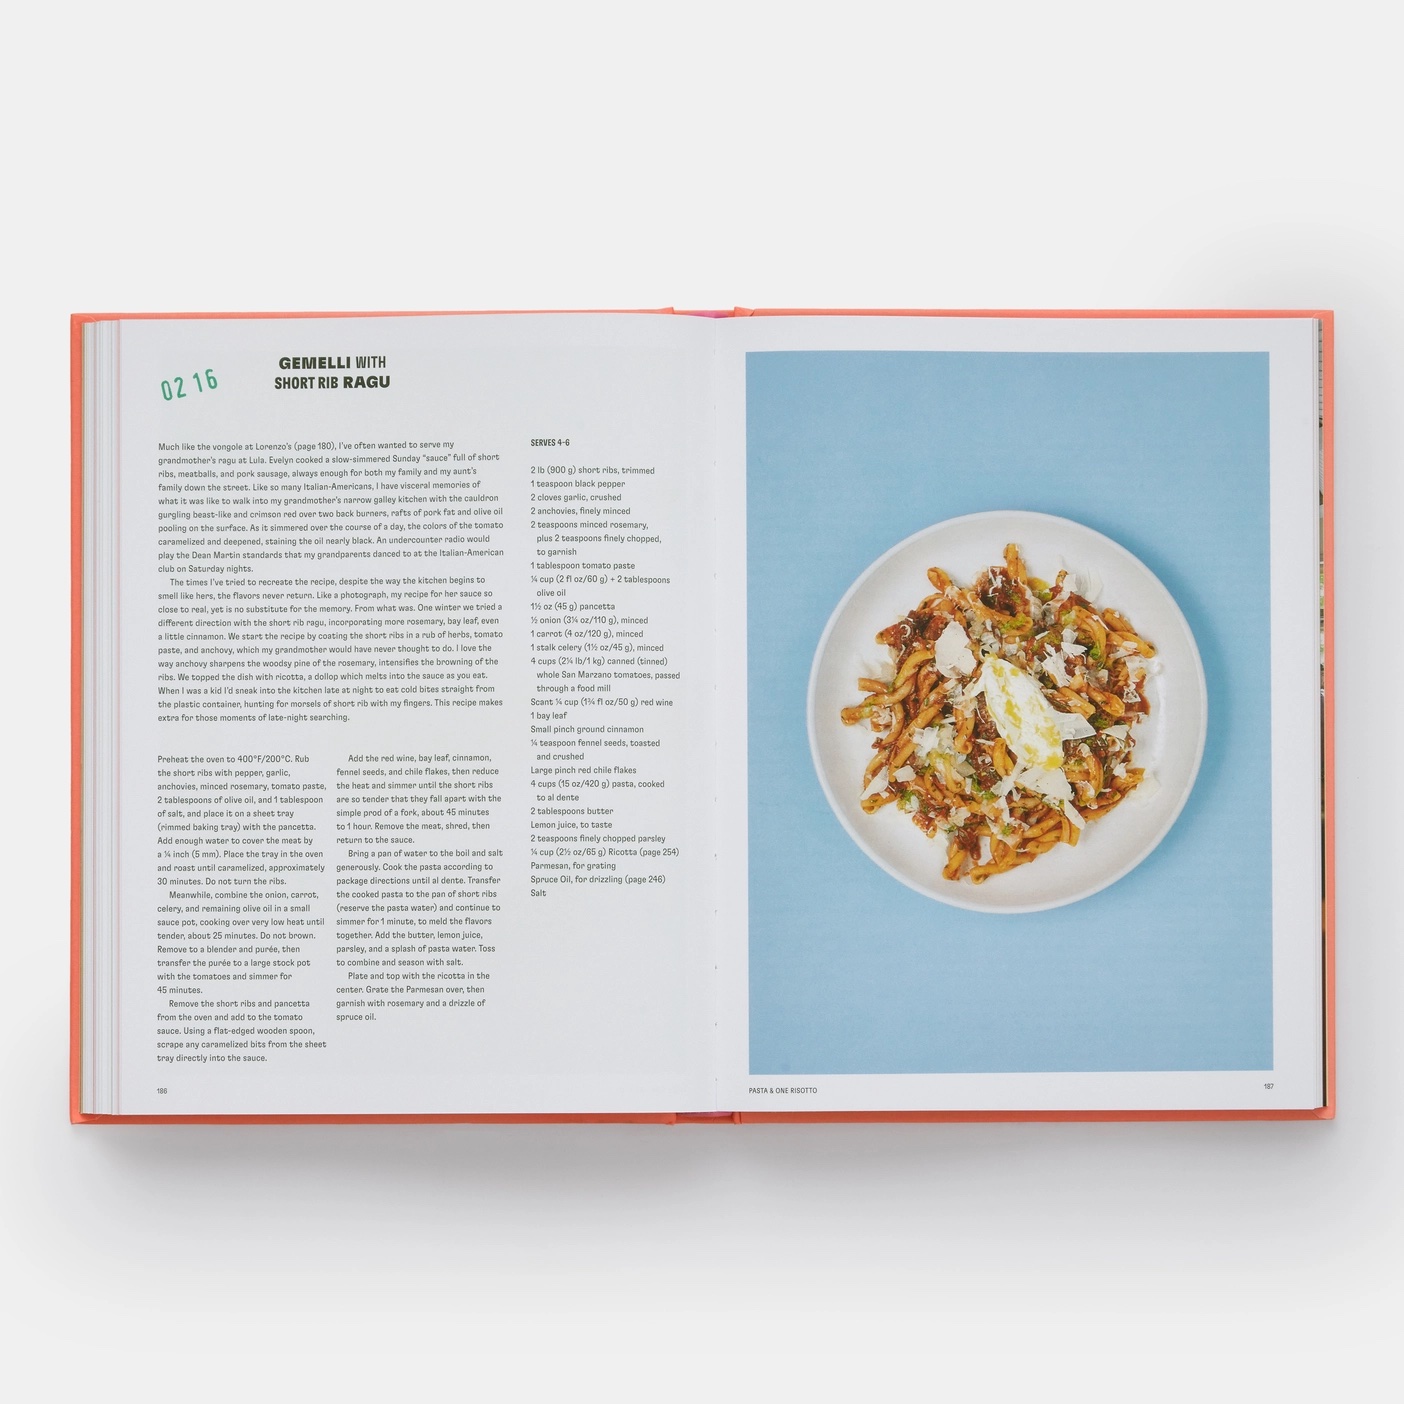 A cookbook opened to a recipe and photograph of a dish.